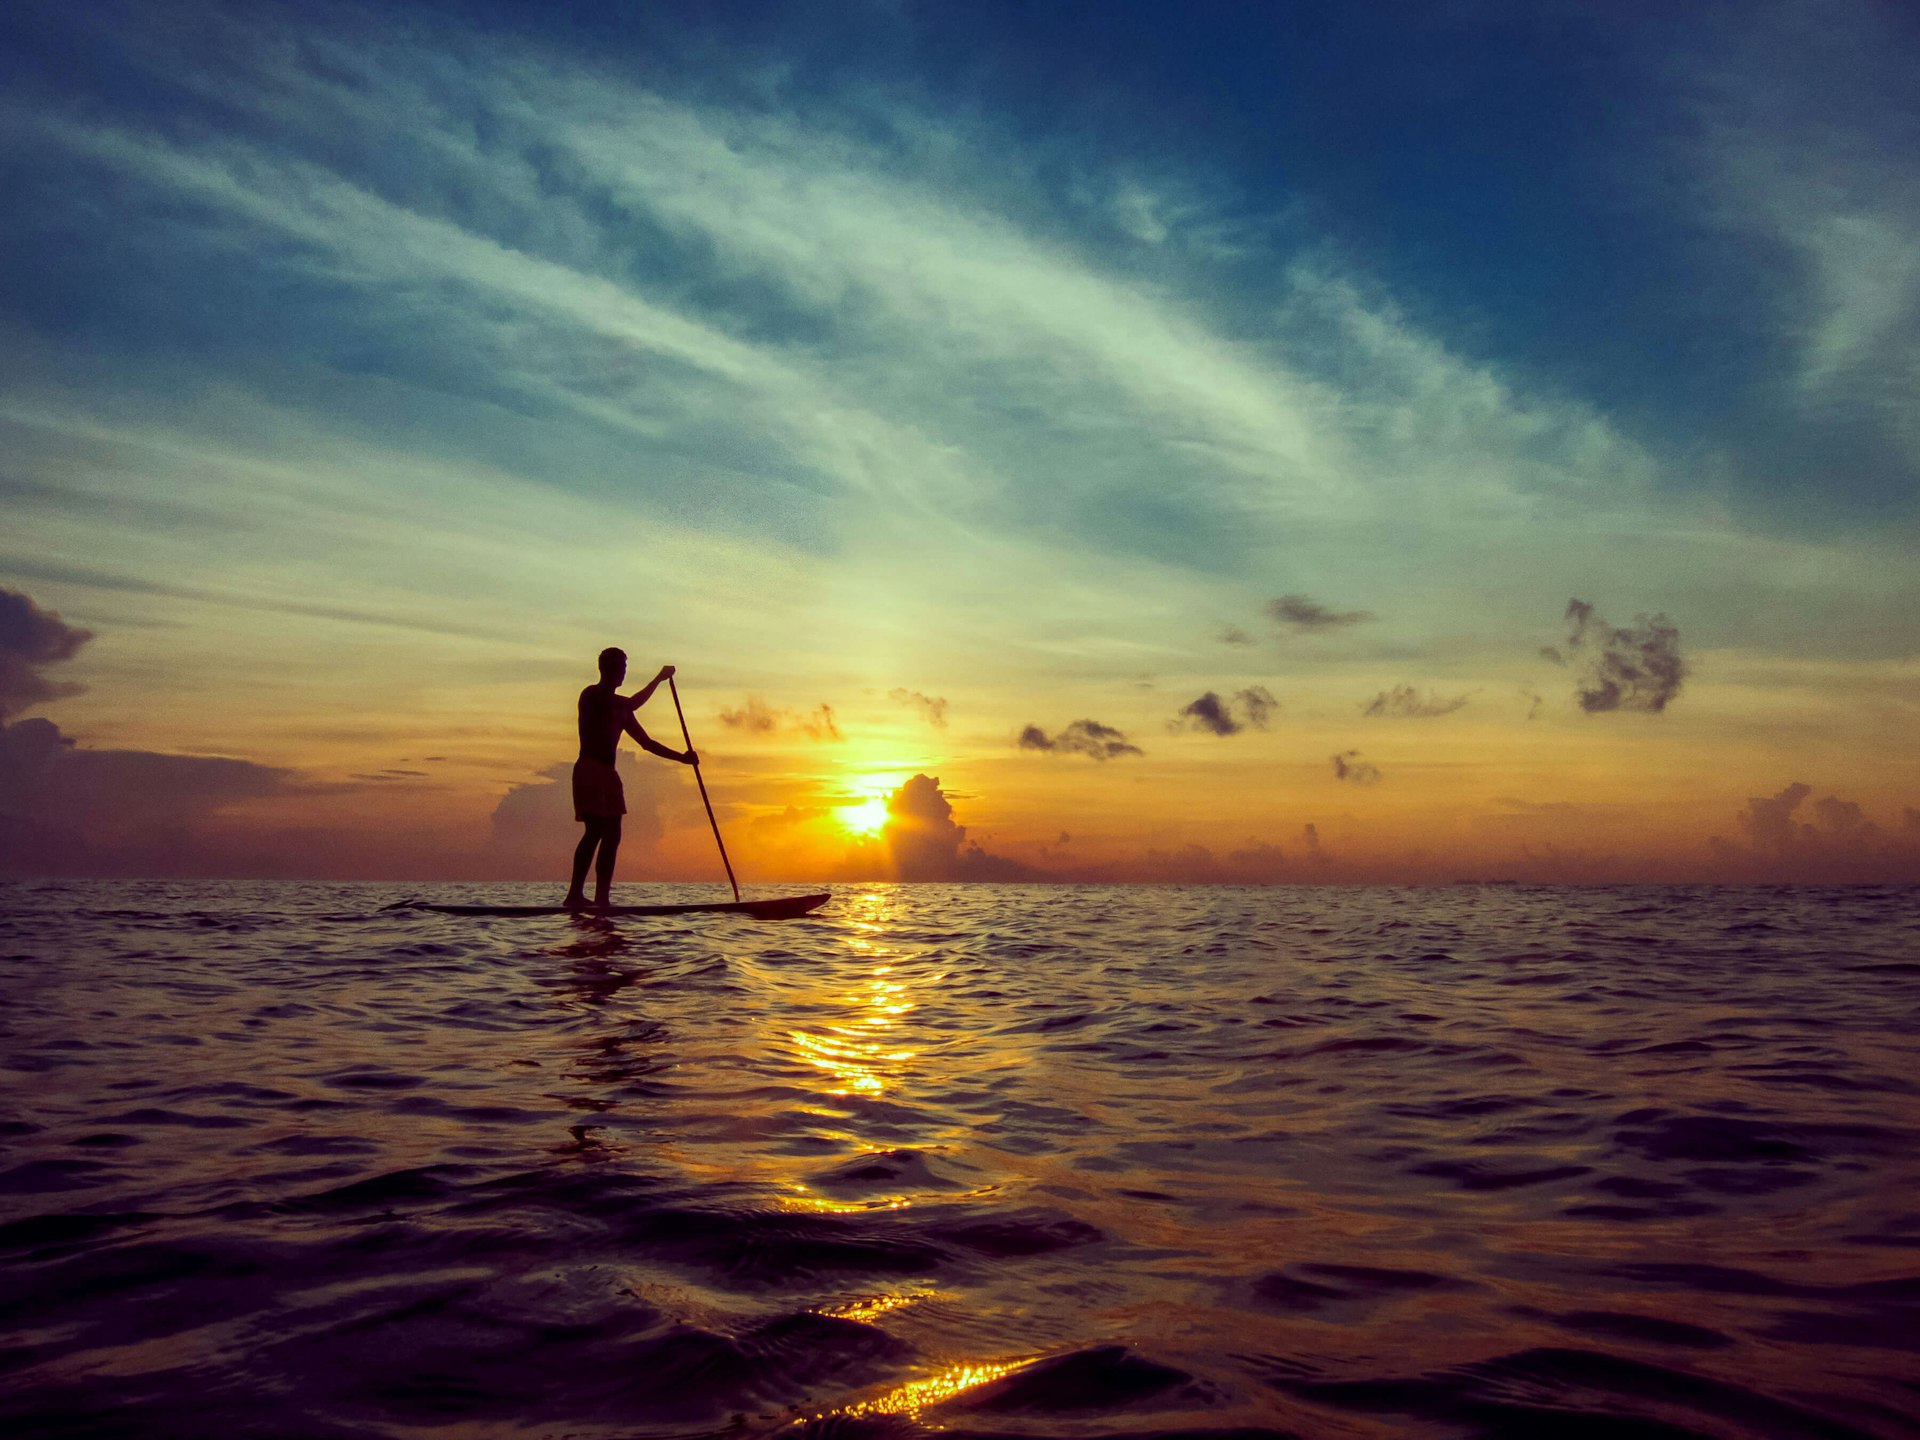 A young man in silhouette, stand-up paddleboarding during a beautiful sunrise